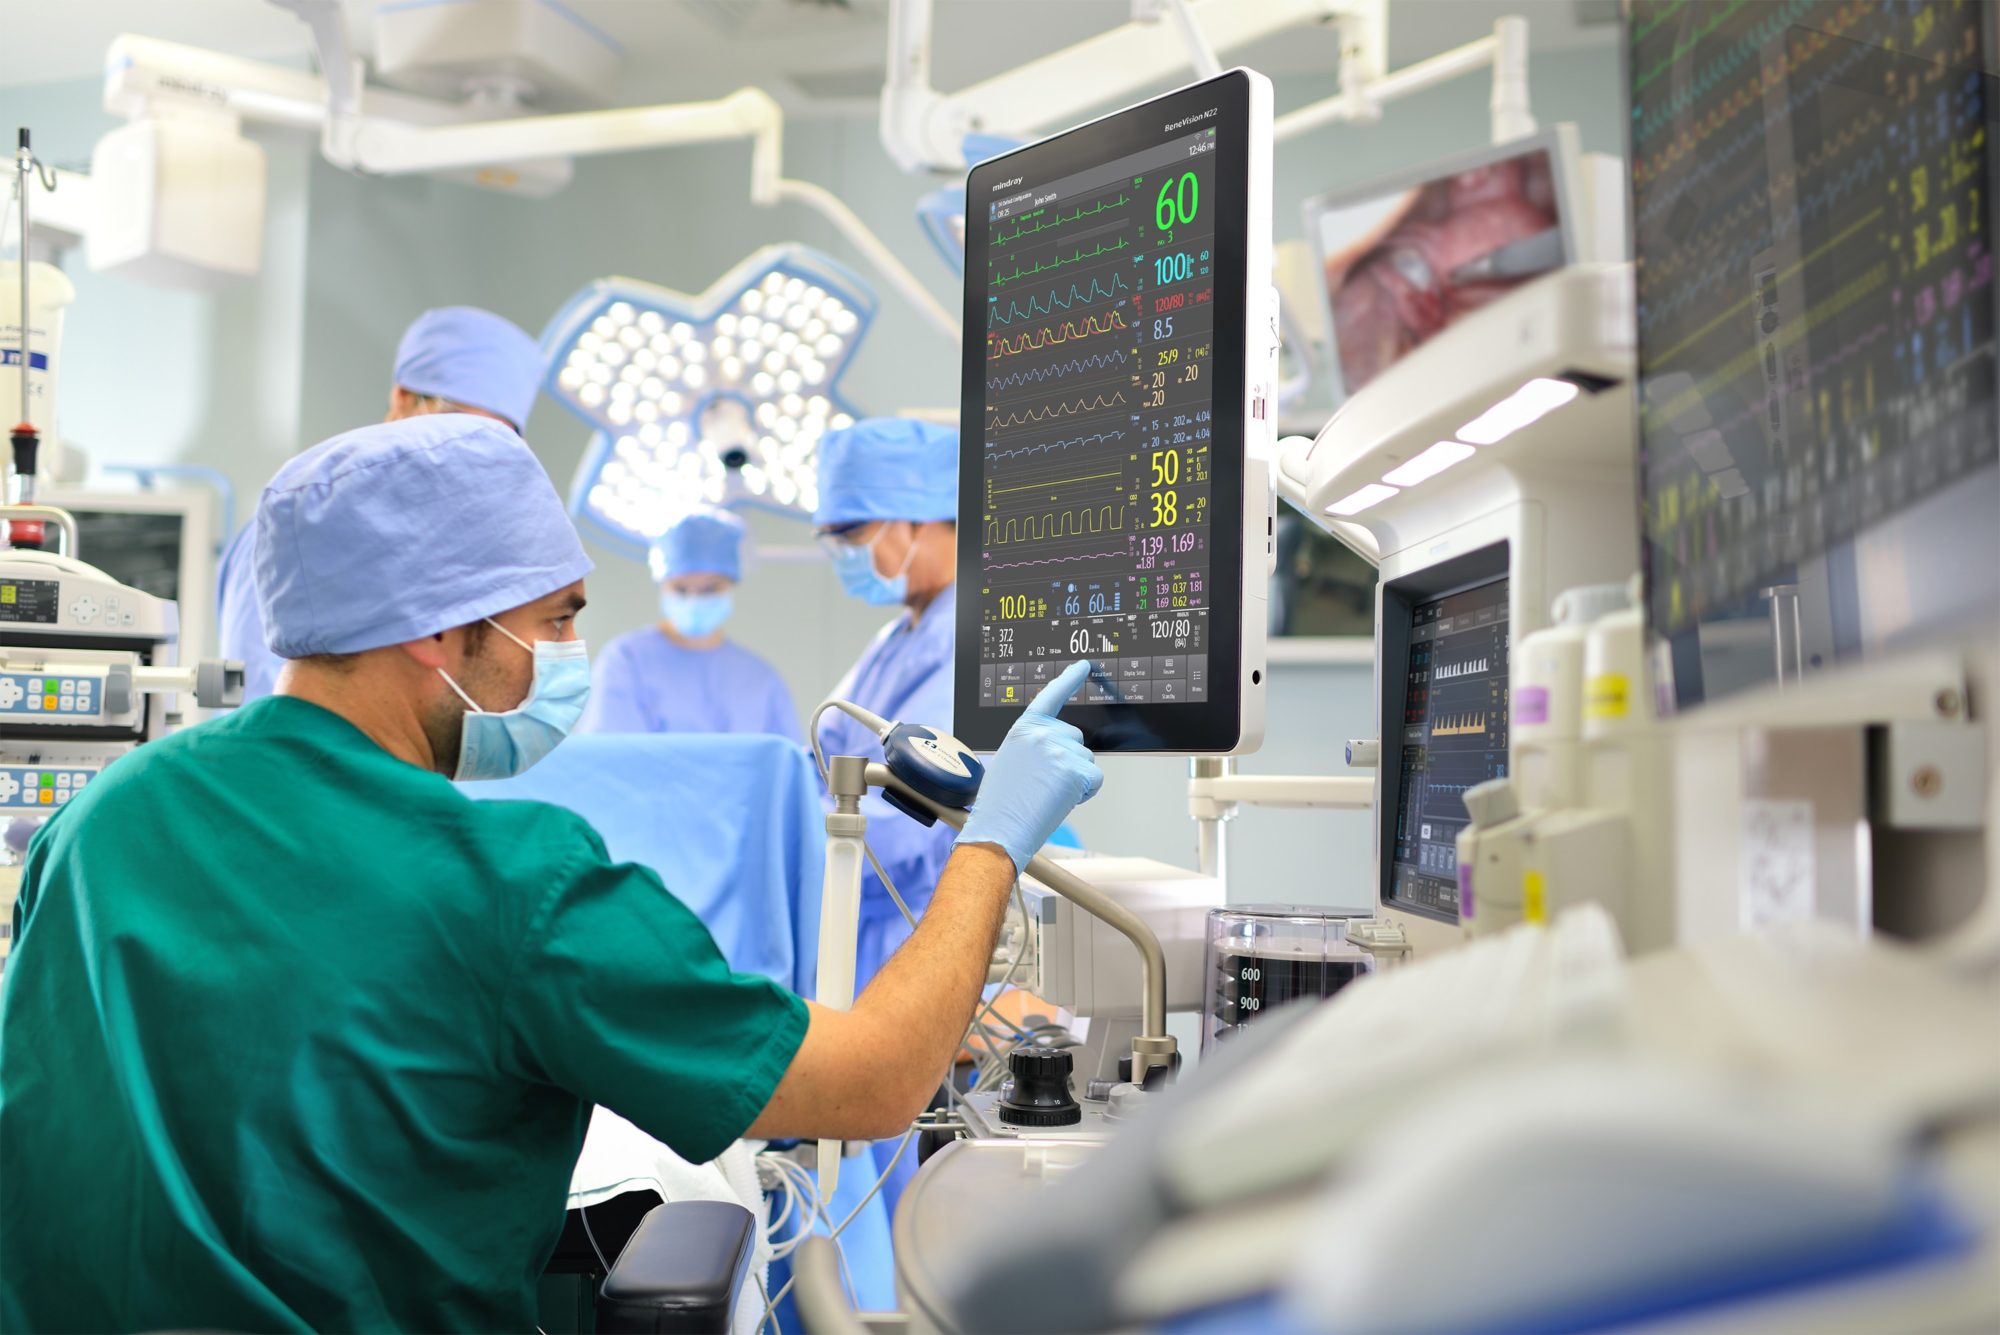 A doctor reviewing information on a computer screen in an operating room